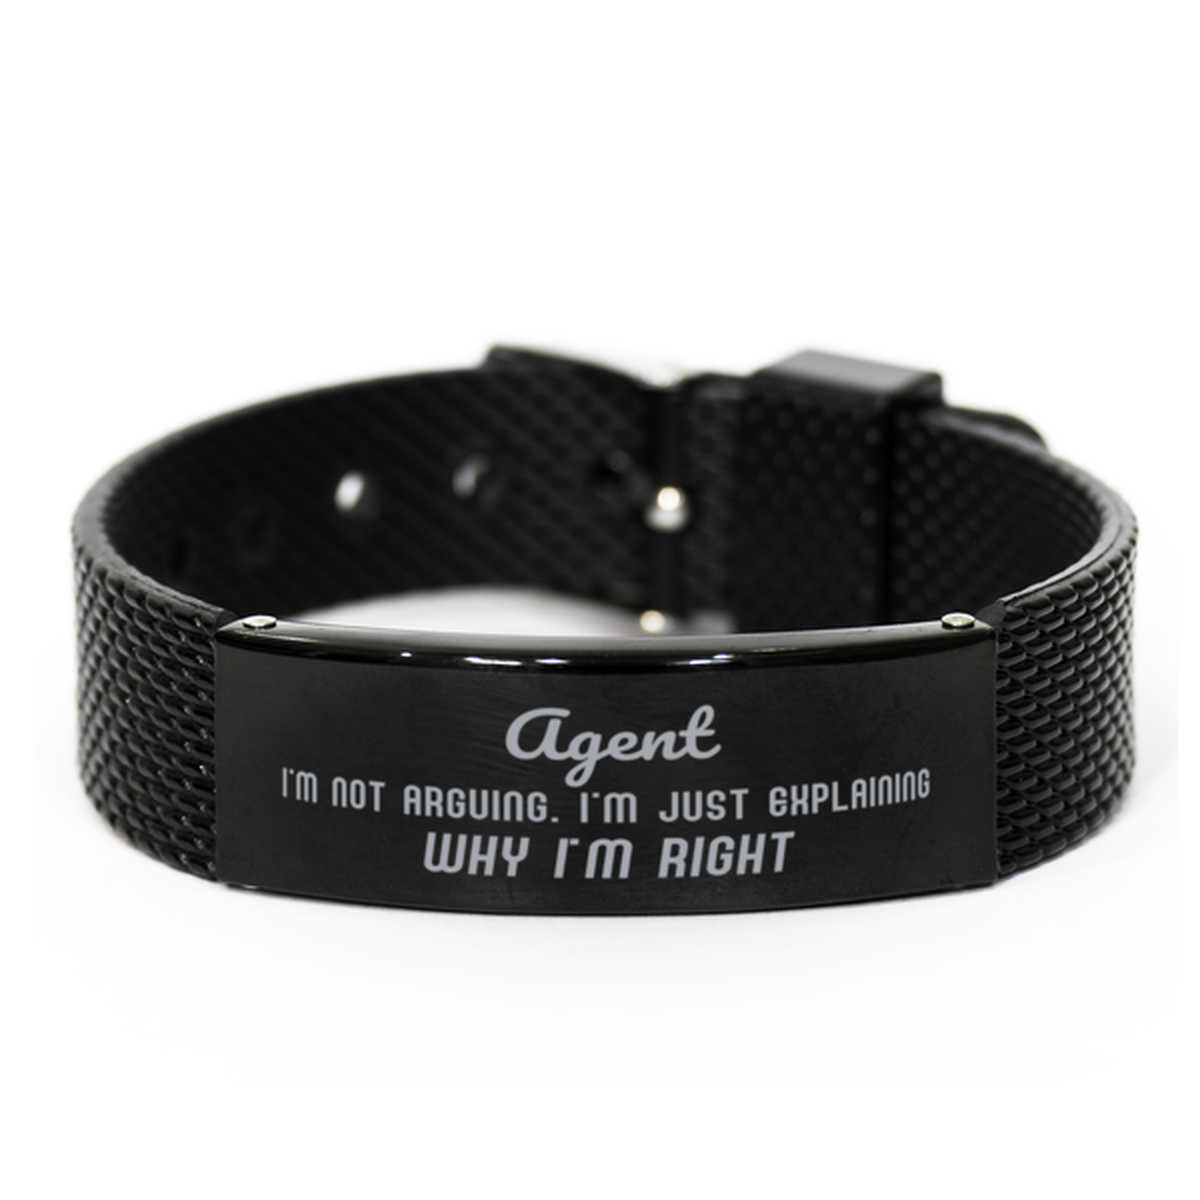 Agent I'm not Arguing. I'm Just Explaining Why I'm RIGHT Black Shark Mesh Bracelet, Funny Saying Quote Agent Gifts For Agent Graduation Birthday Christmas Gifts for Men Women Coworker